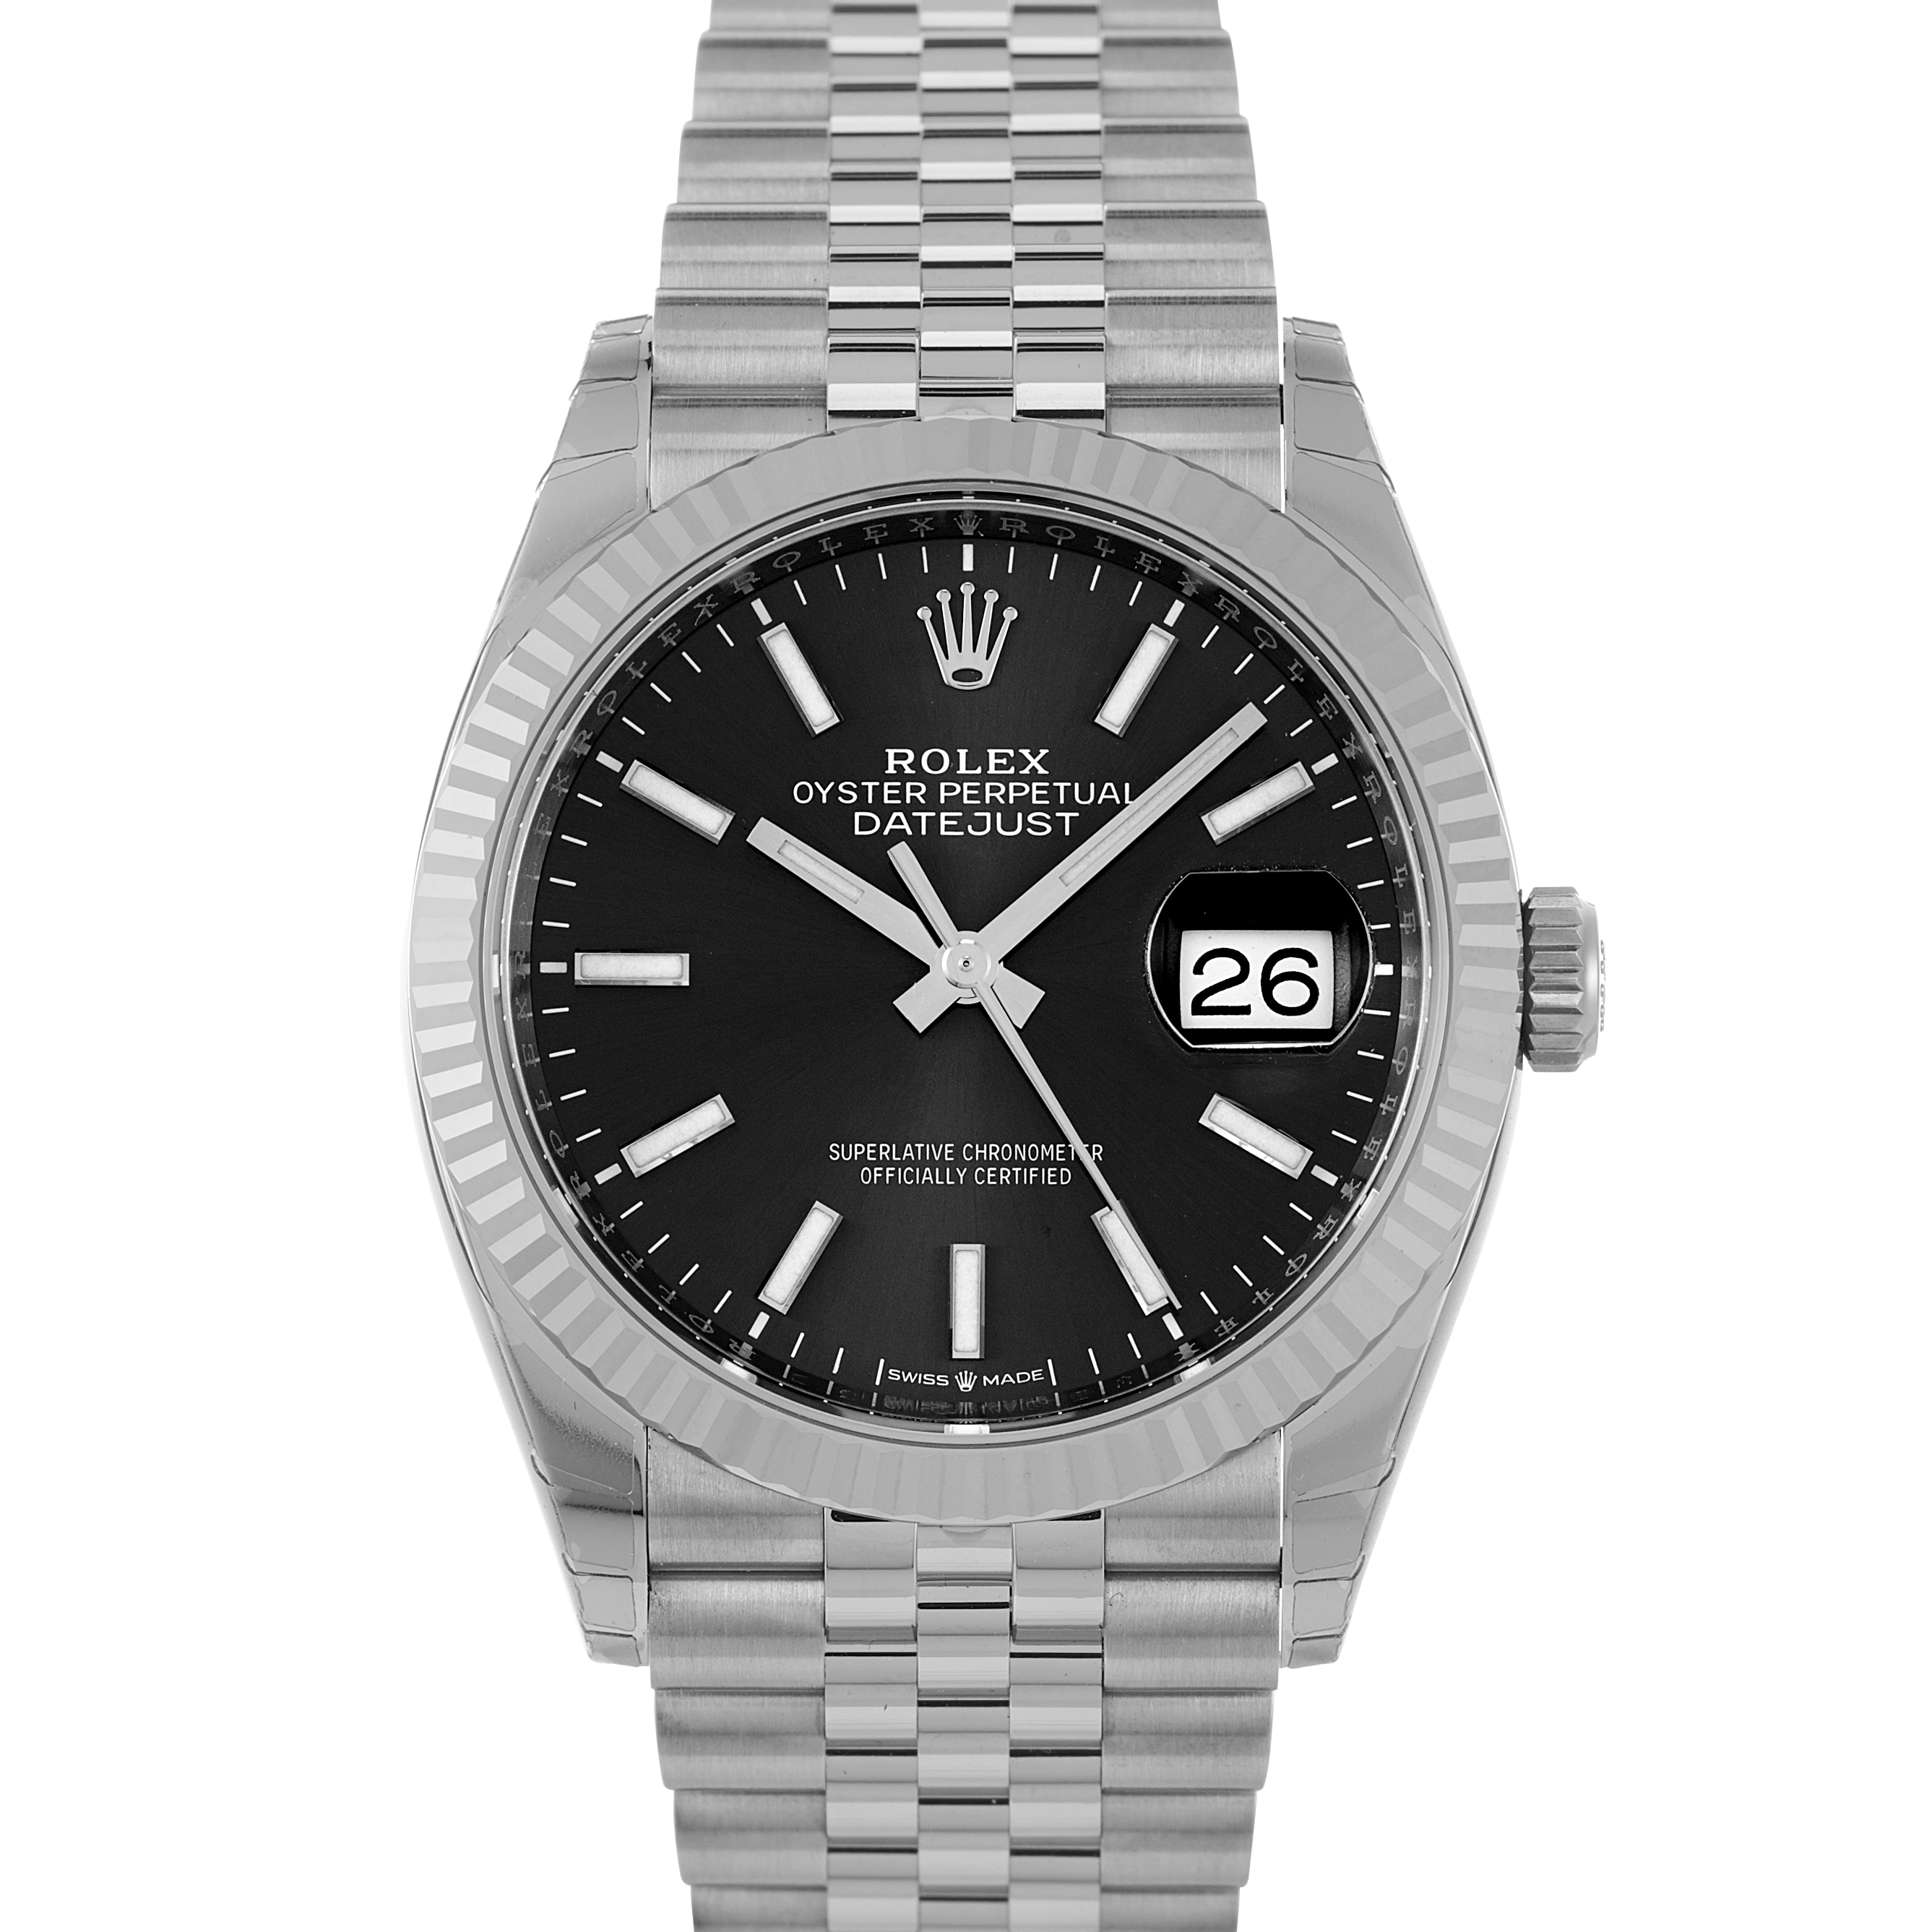 Rolex Datejust 126234 in Stainless 